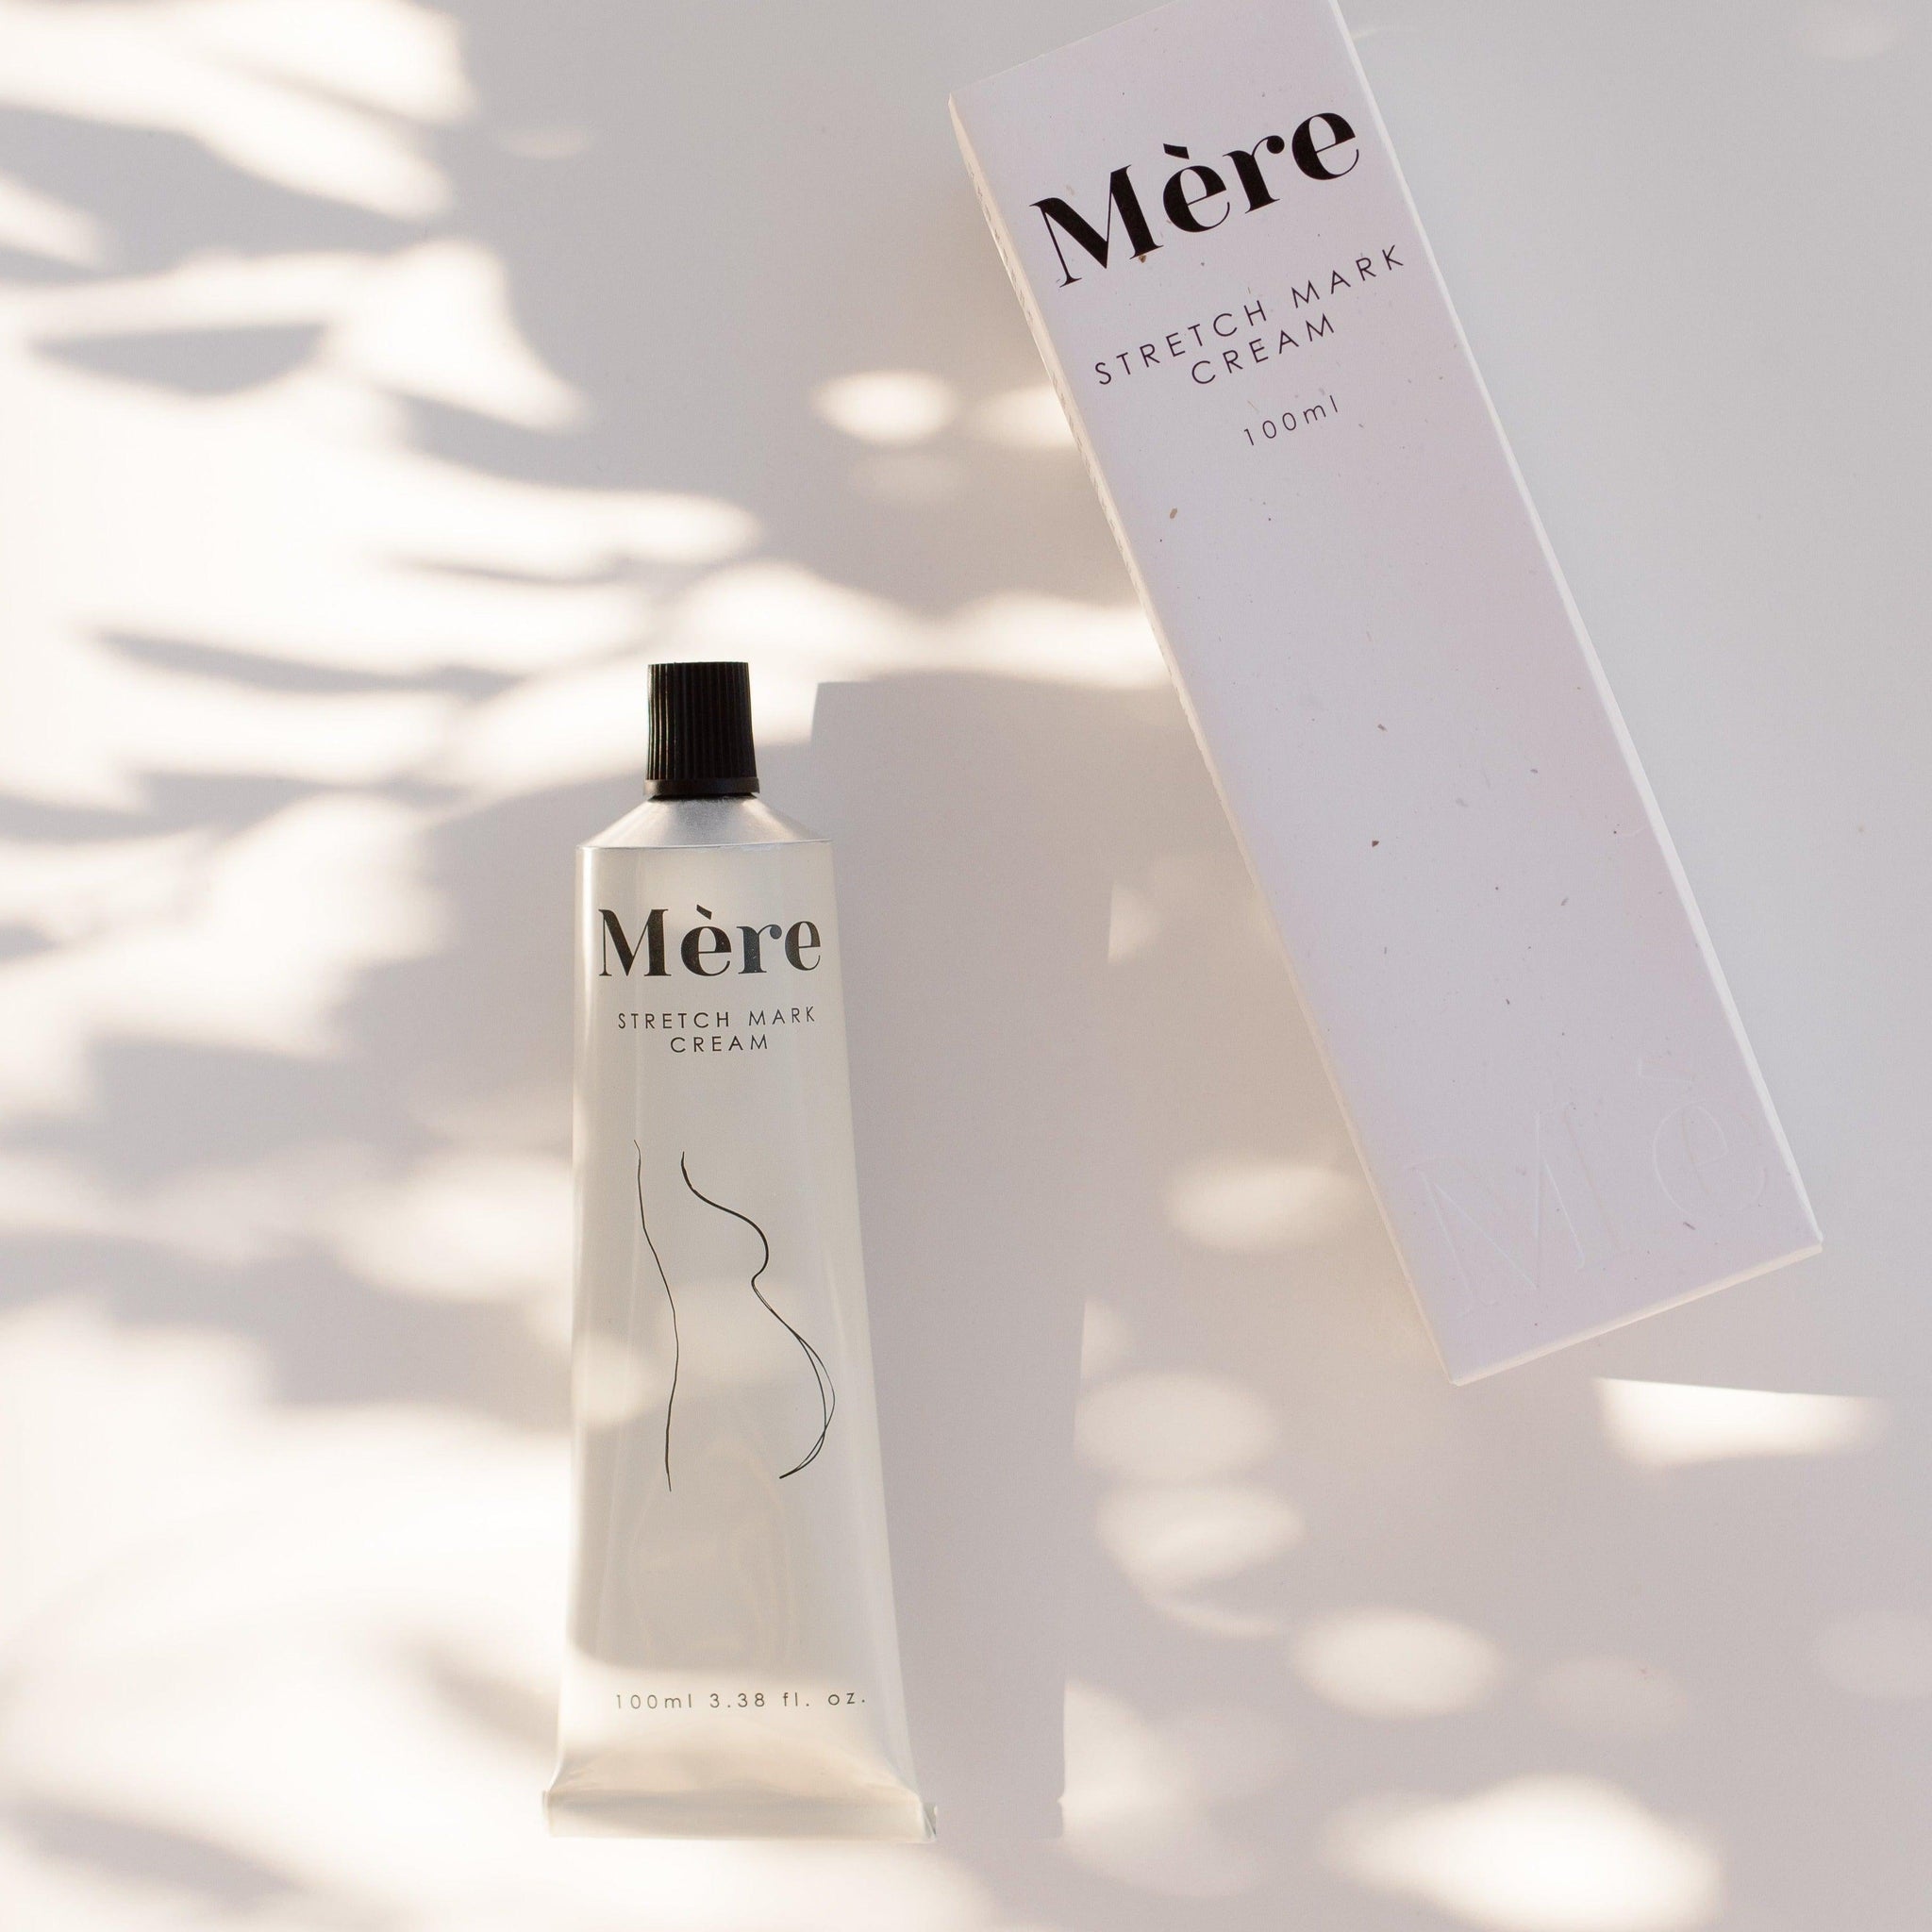 A tube of Mère stretch mark cream on a white surface next to its box.